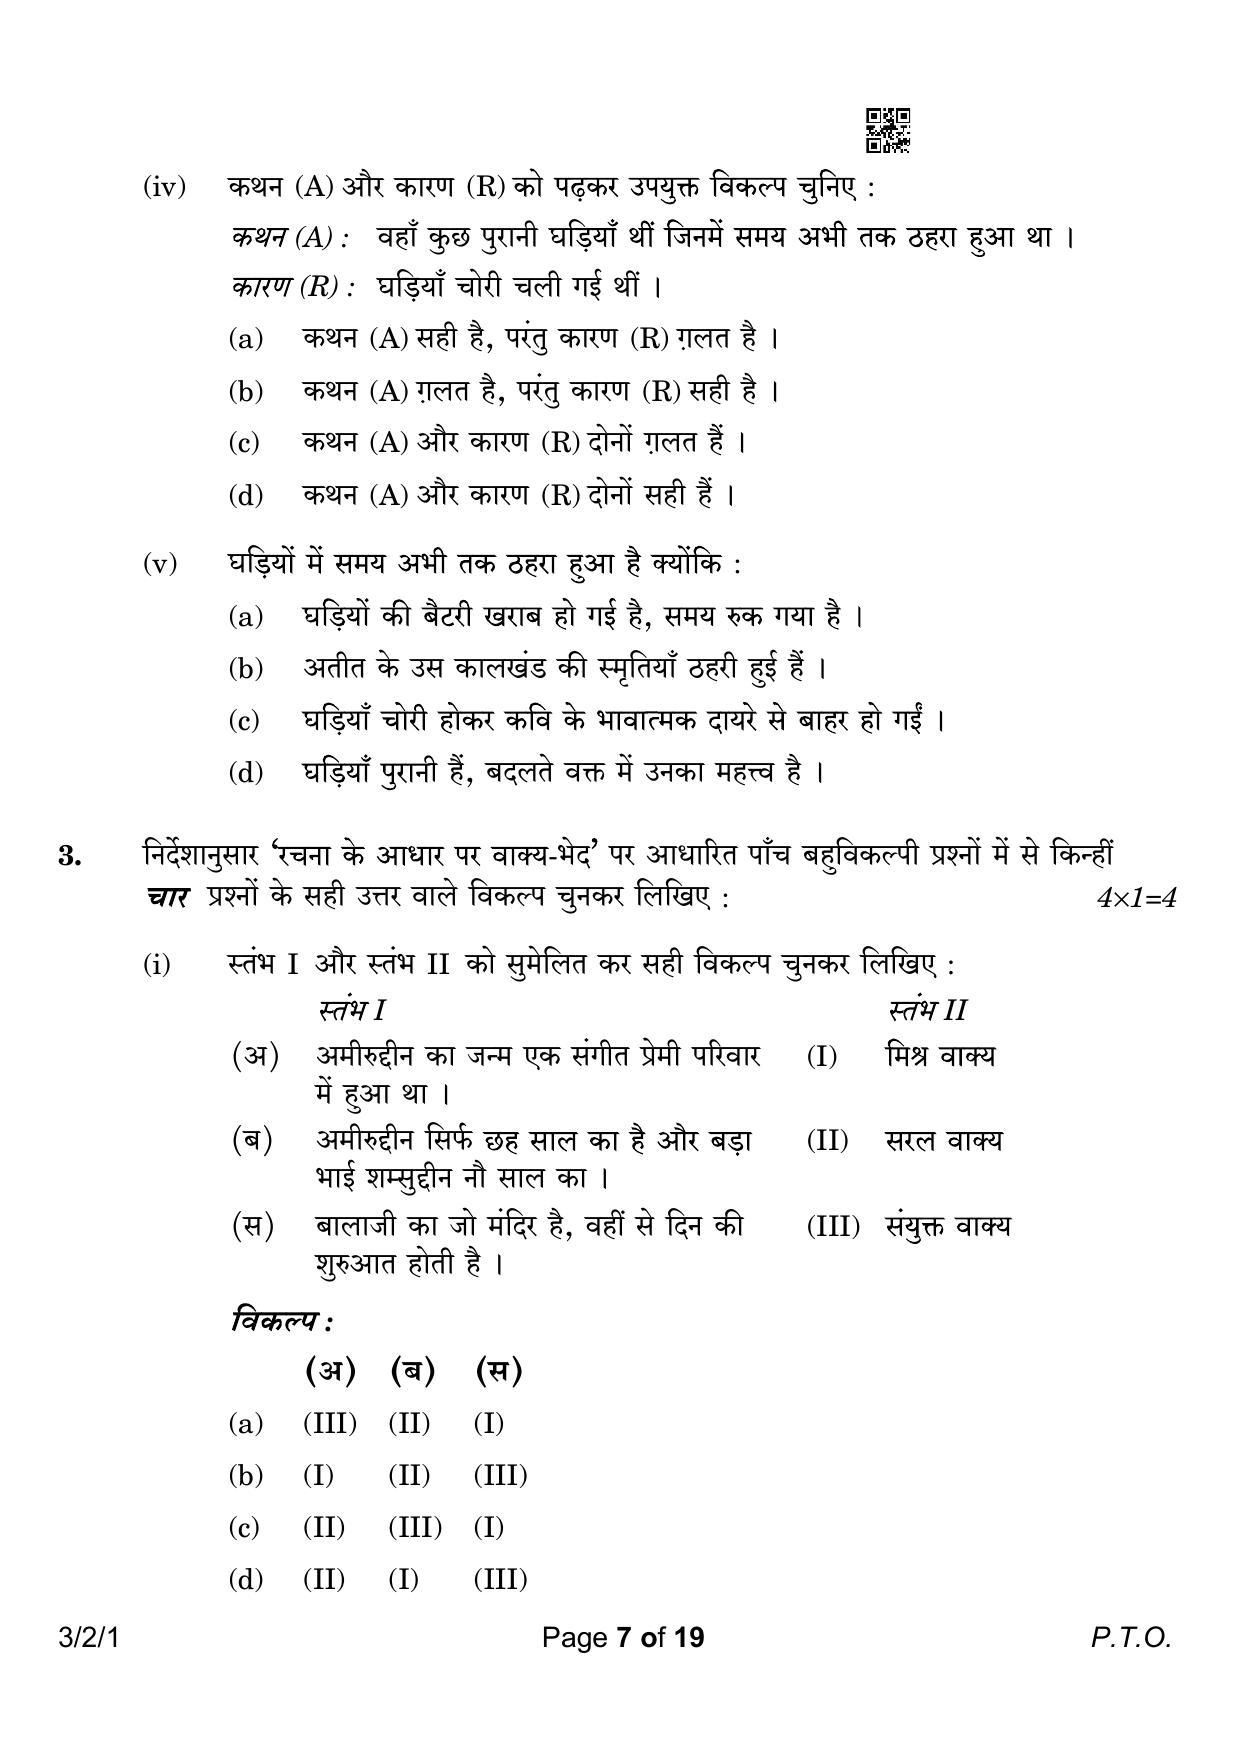 CBSE Class 10 3-2-1 Hindi A 2023 Question Paper - Page 7